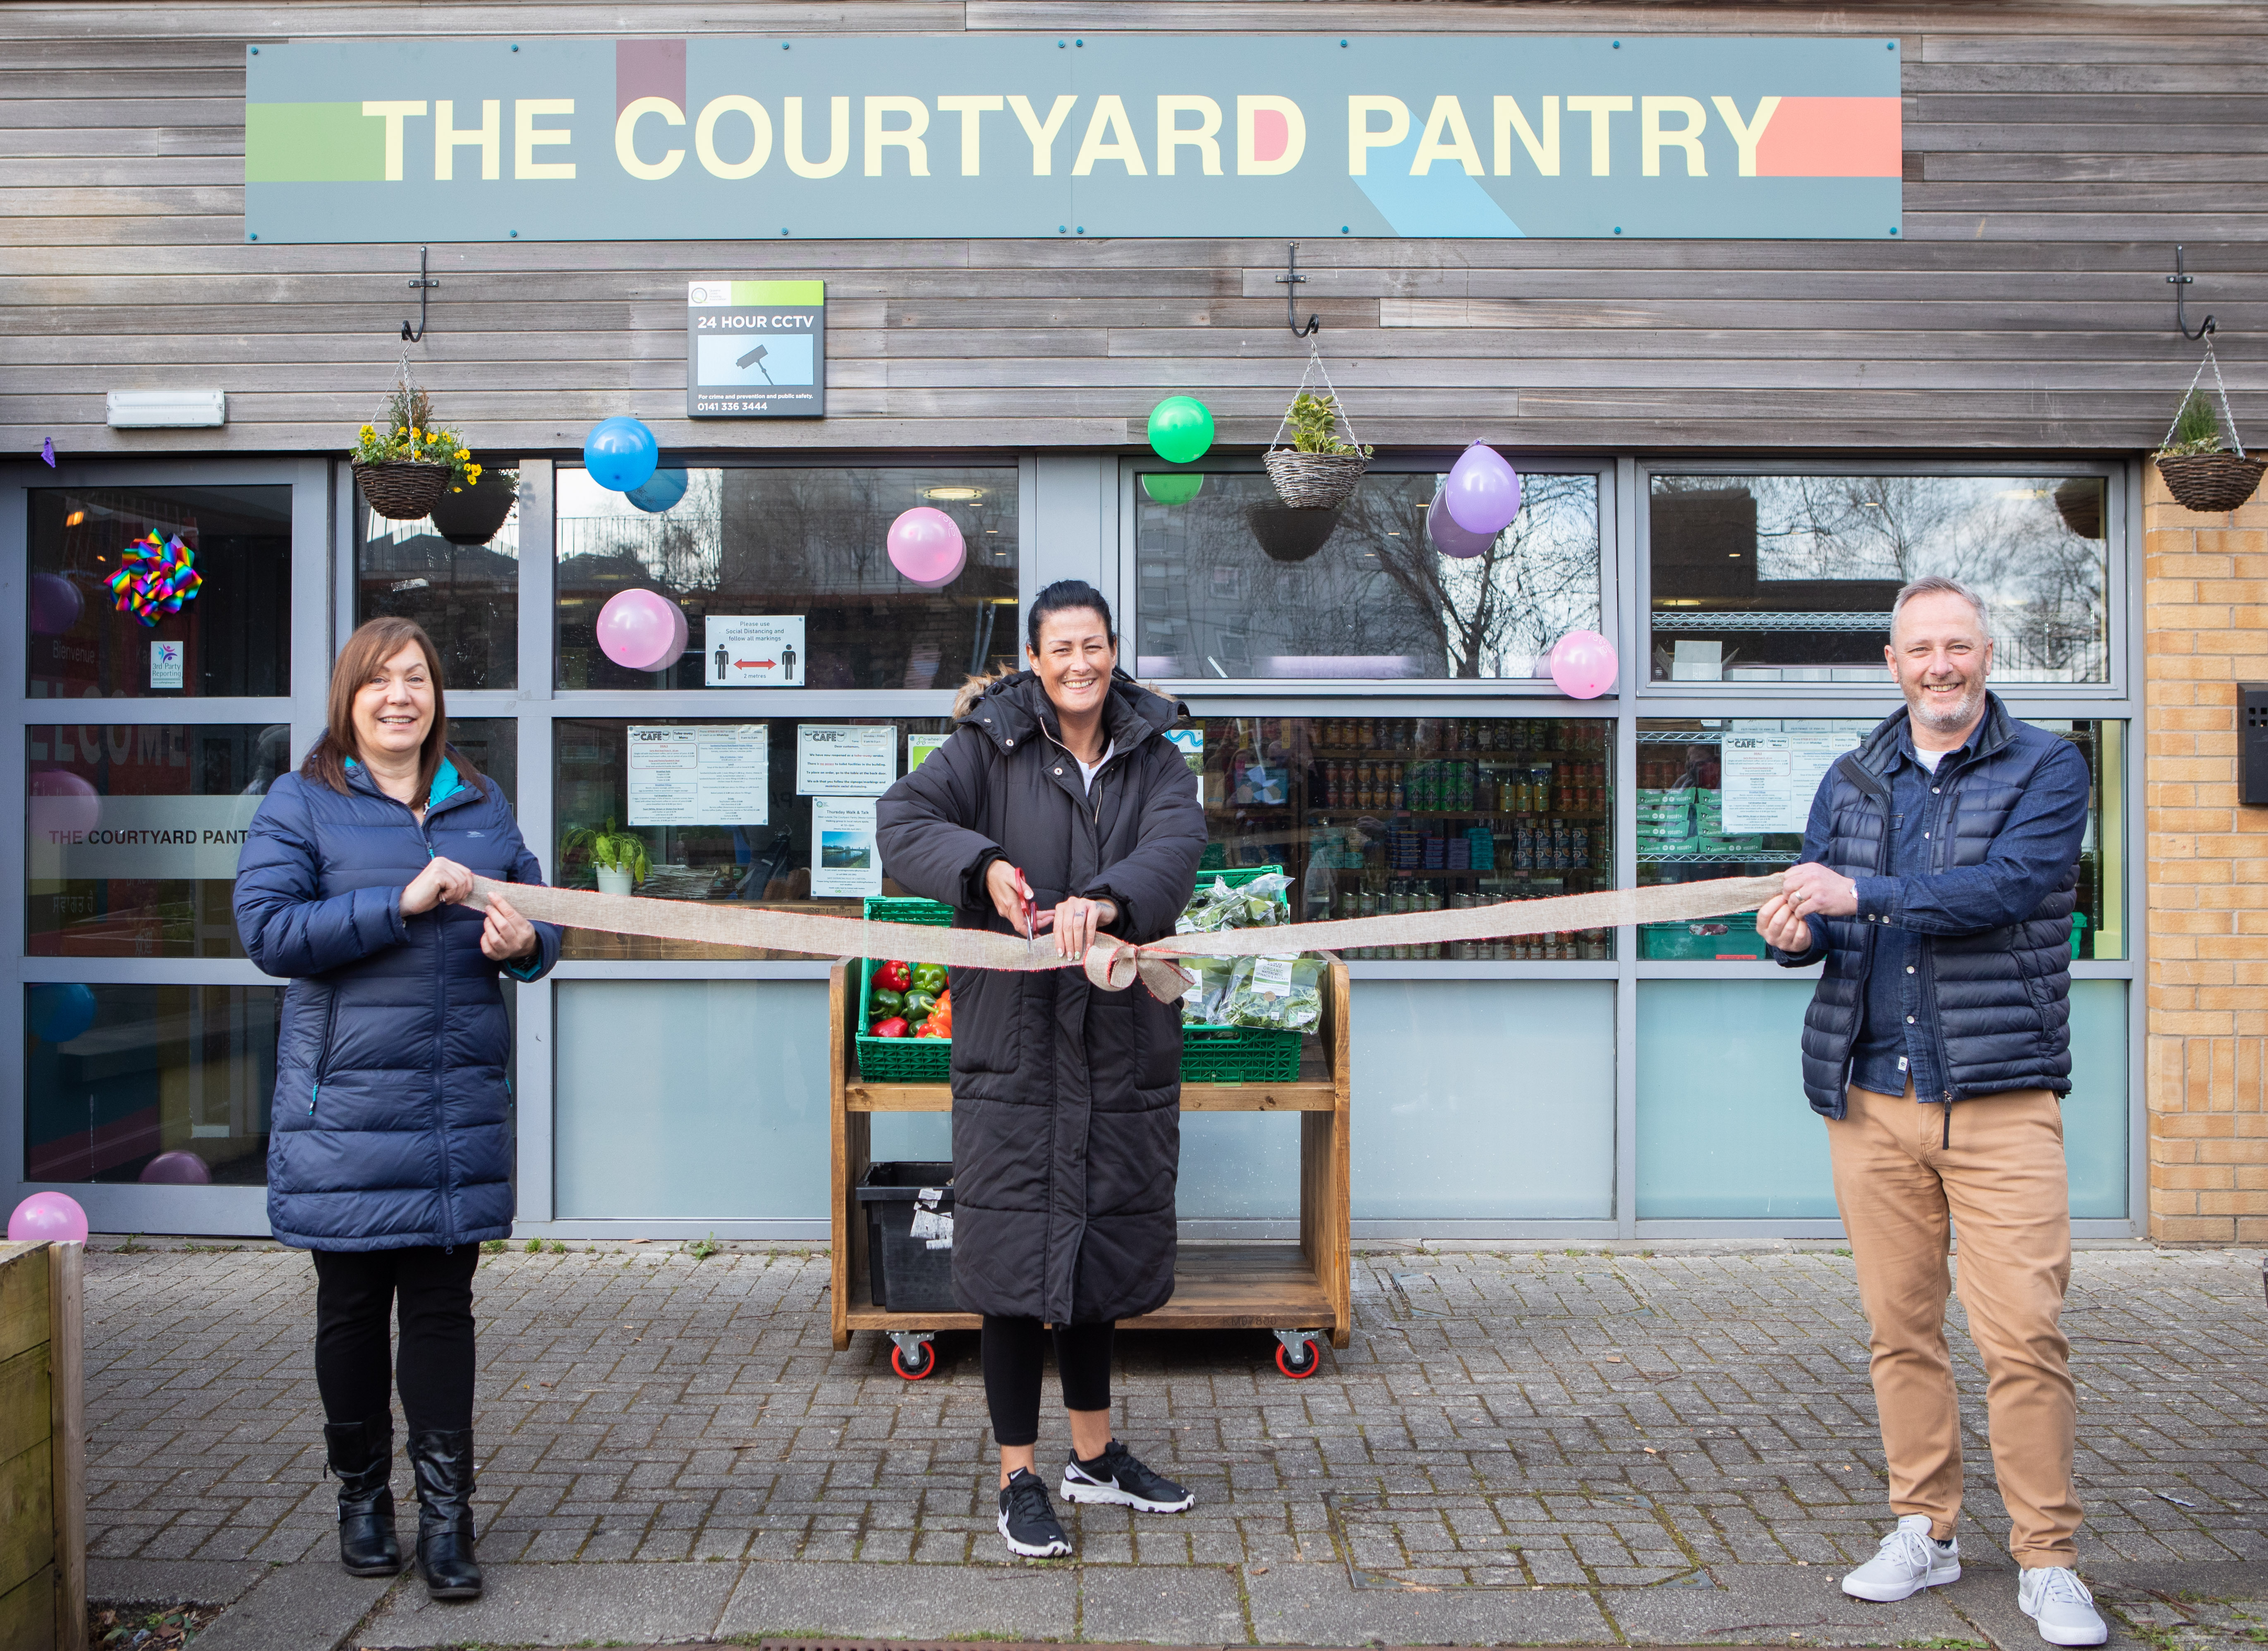 Queens Cross Housing Association courtyard pantry signs up 350th member